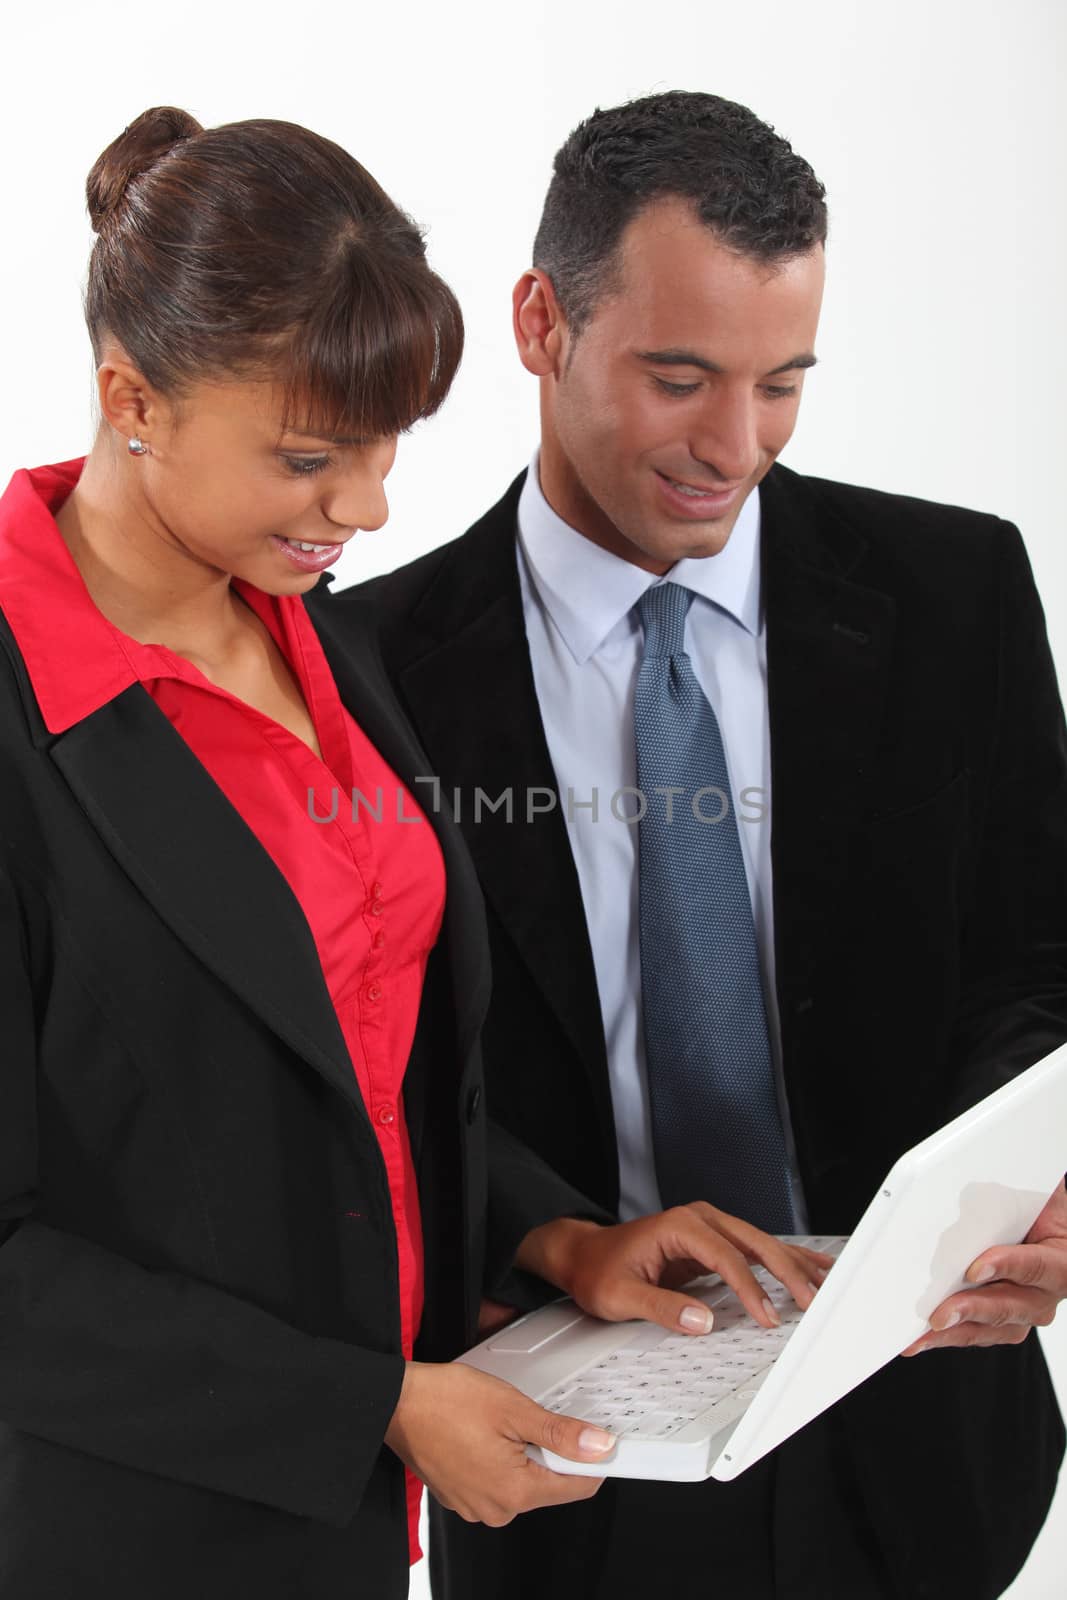 Two colleagues with laptop